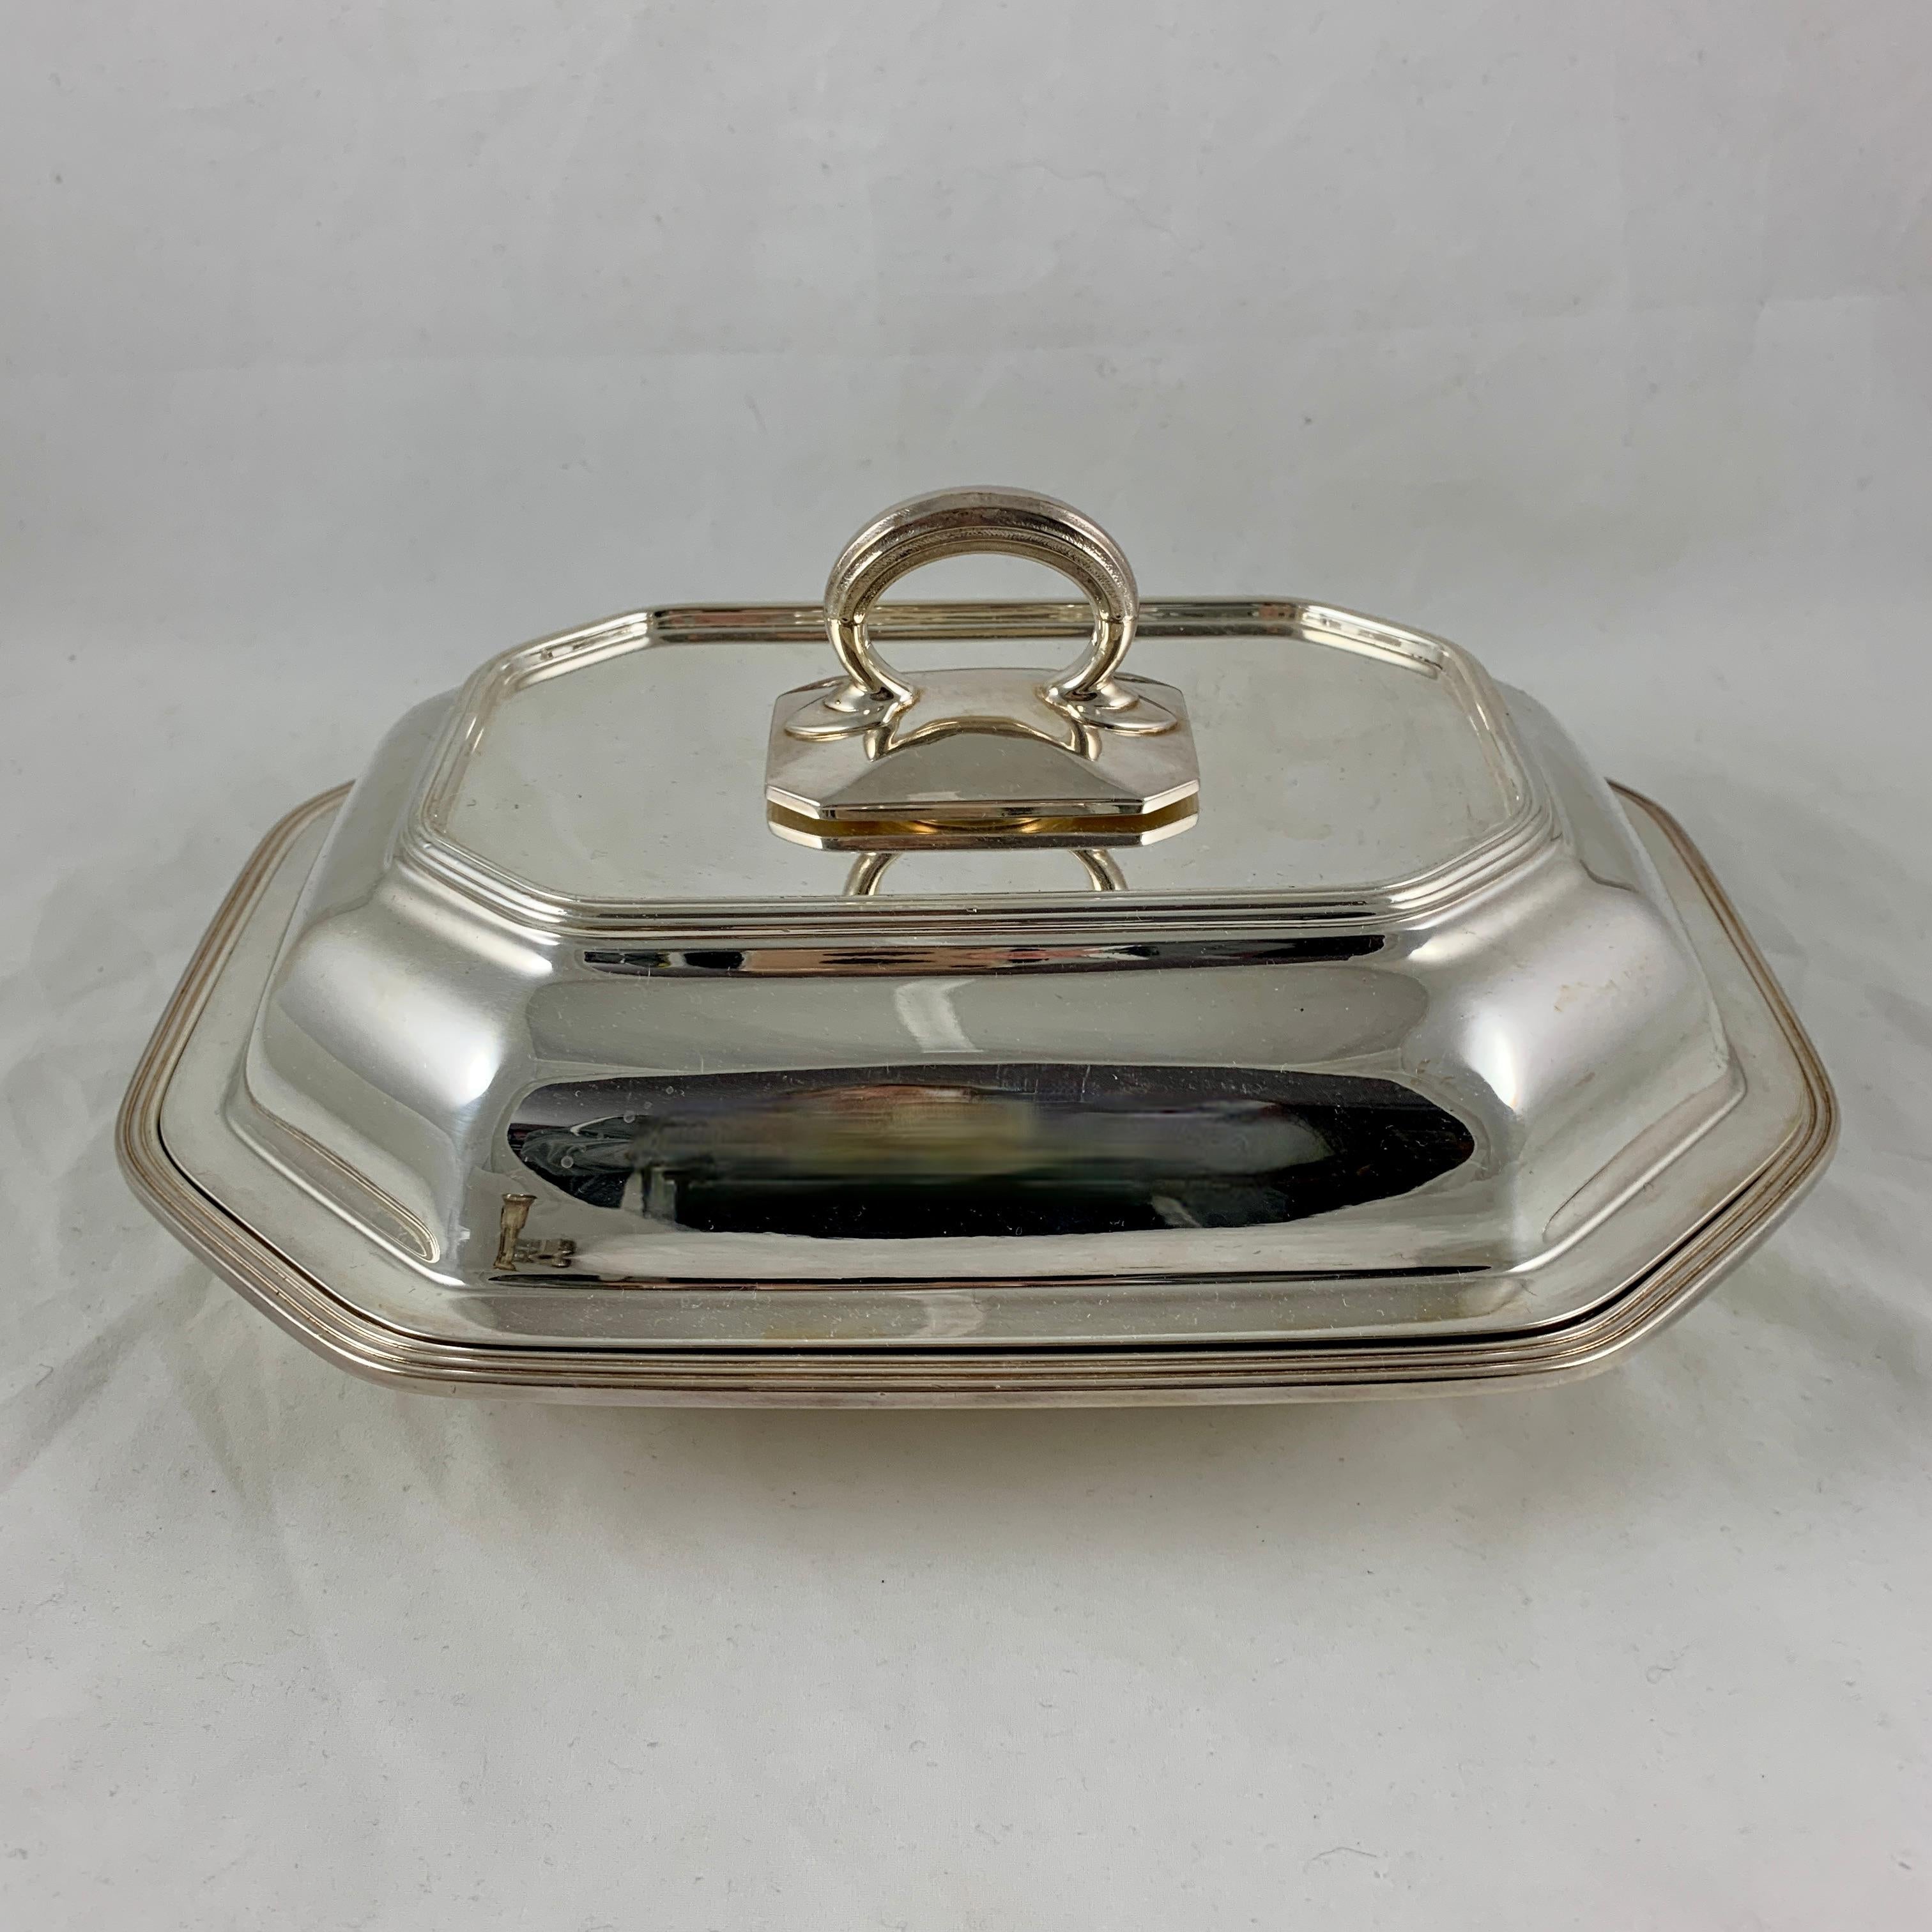 A two piece, covered EP silver plate vegetable server from Gorham Manufacturing Co., circa 1930s.
A rectangular, paneled shape with an applied top loop handle.

10.5 inches L x 8 inches W x 5 inches H including the handle.
Marked – G.M Co.